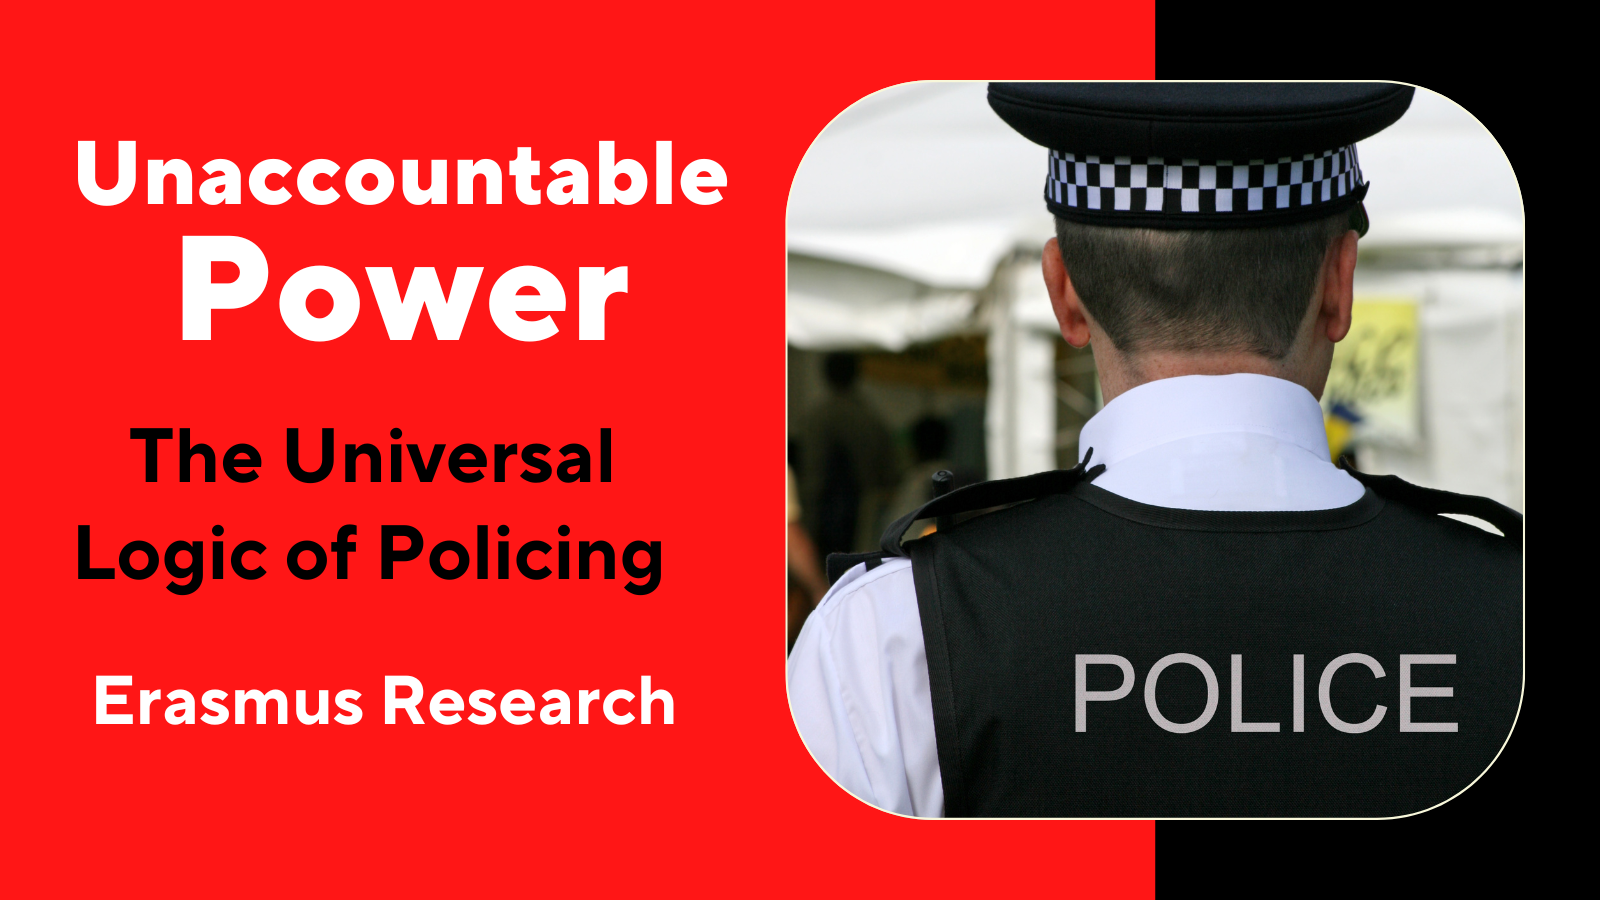 Unaccountable Power – The Universal Logic of Policing  